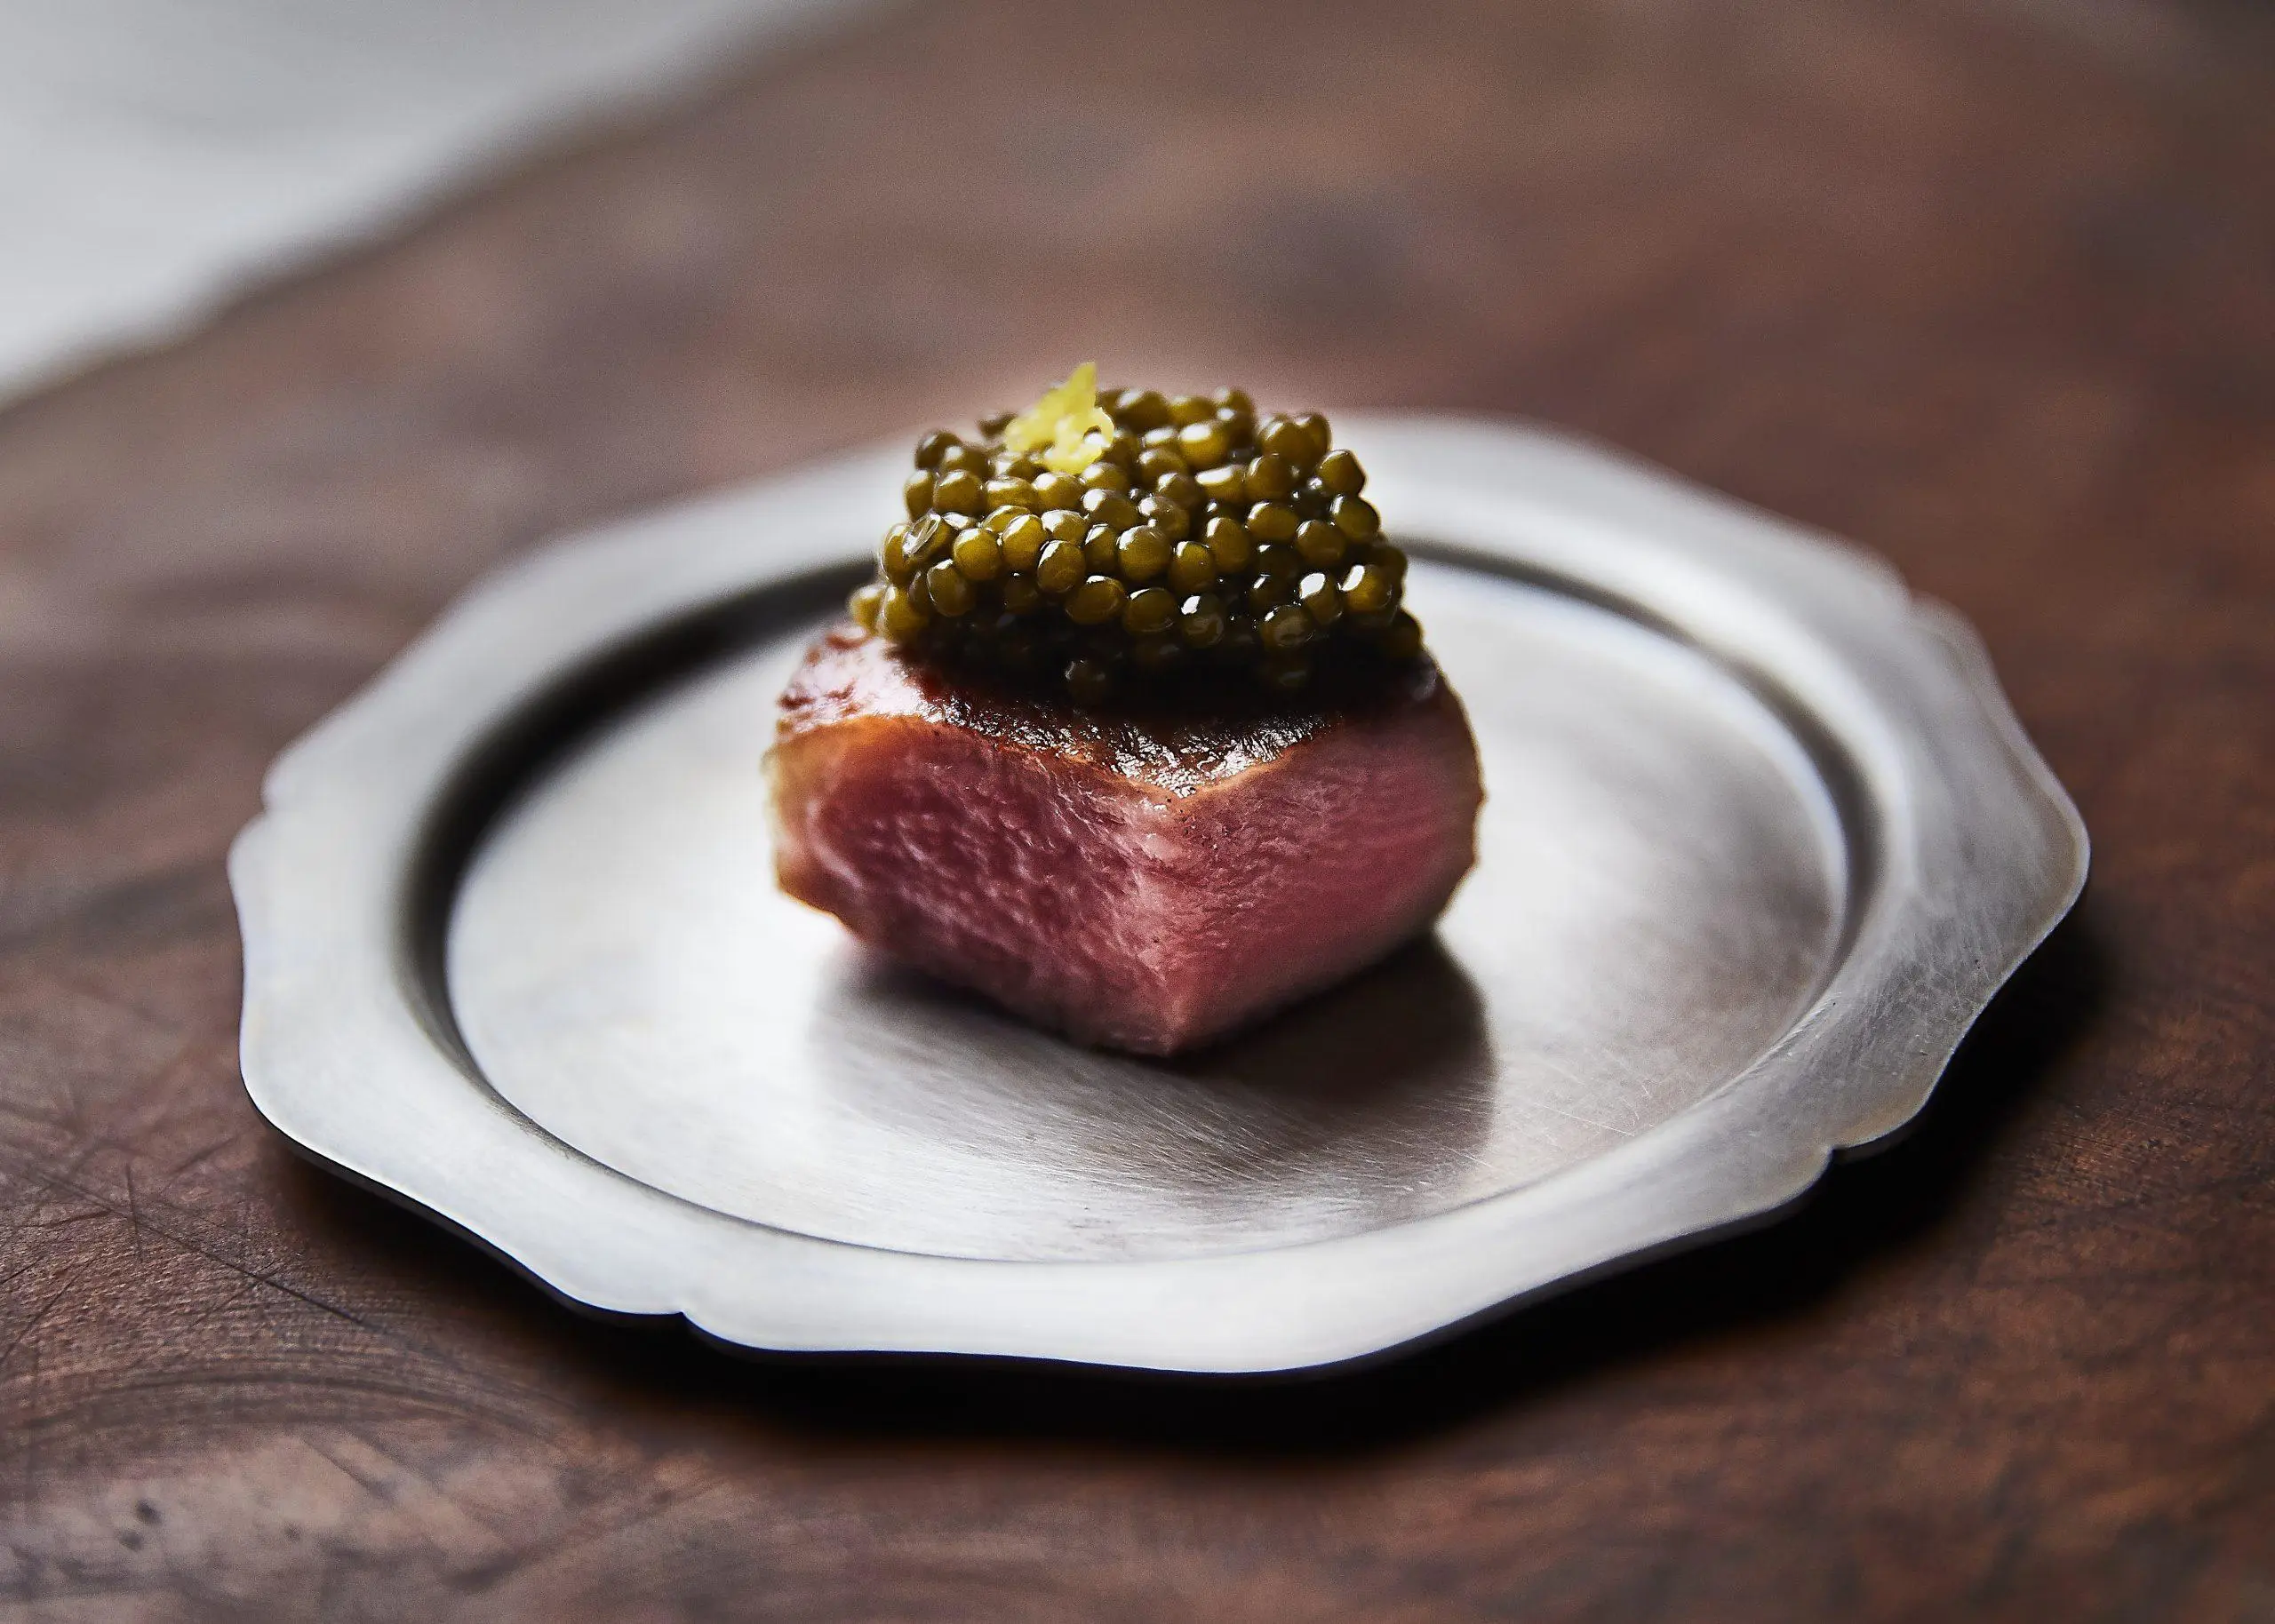 Unique dish contains Wagyu beef with caviar on top served from Wagyumafia restaurant in Via Riyadh